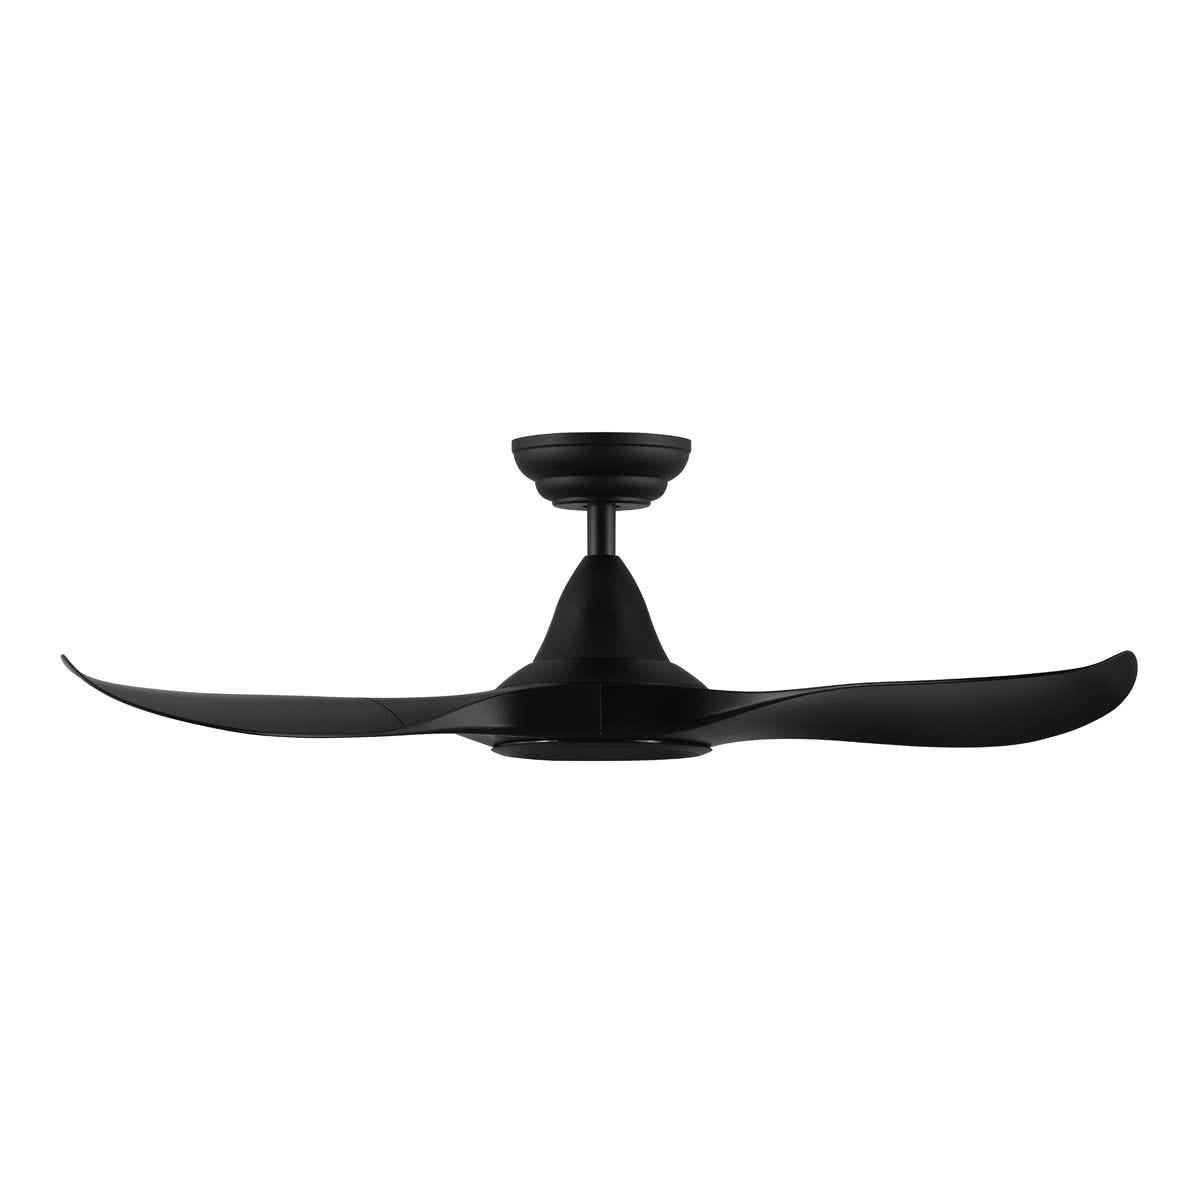 Eglo NOOSA 40” ABS 3 Blade DC Ceiling Fan with Remote Control - Mases LightingEglo